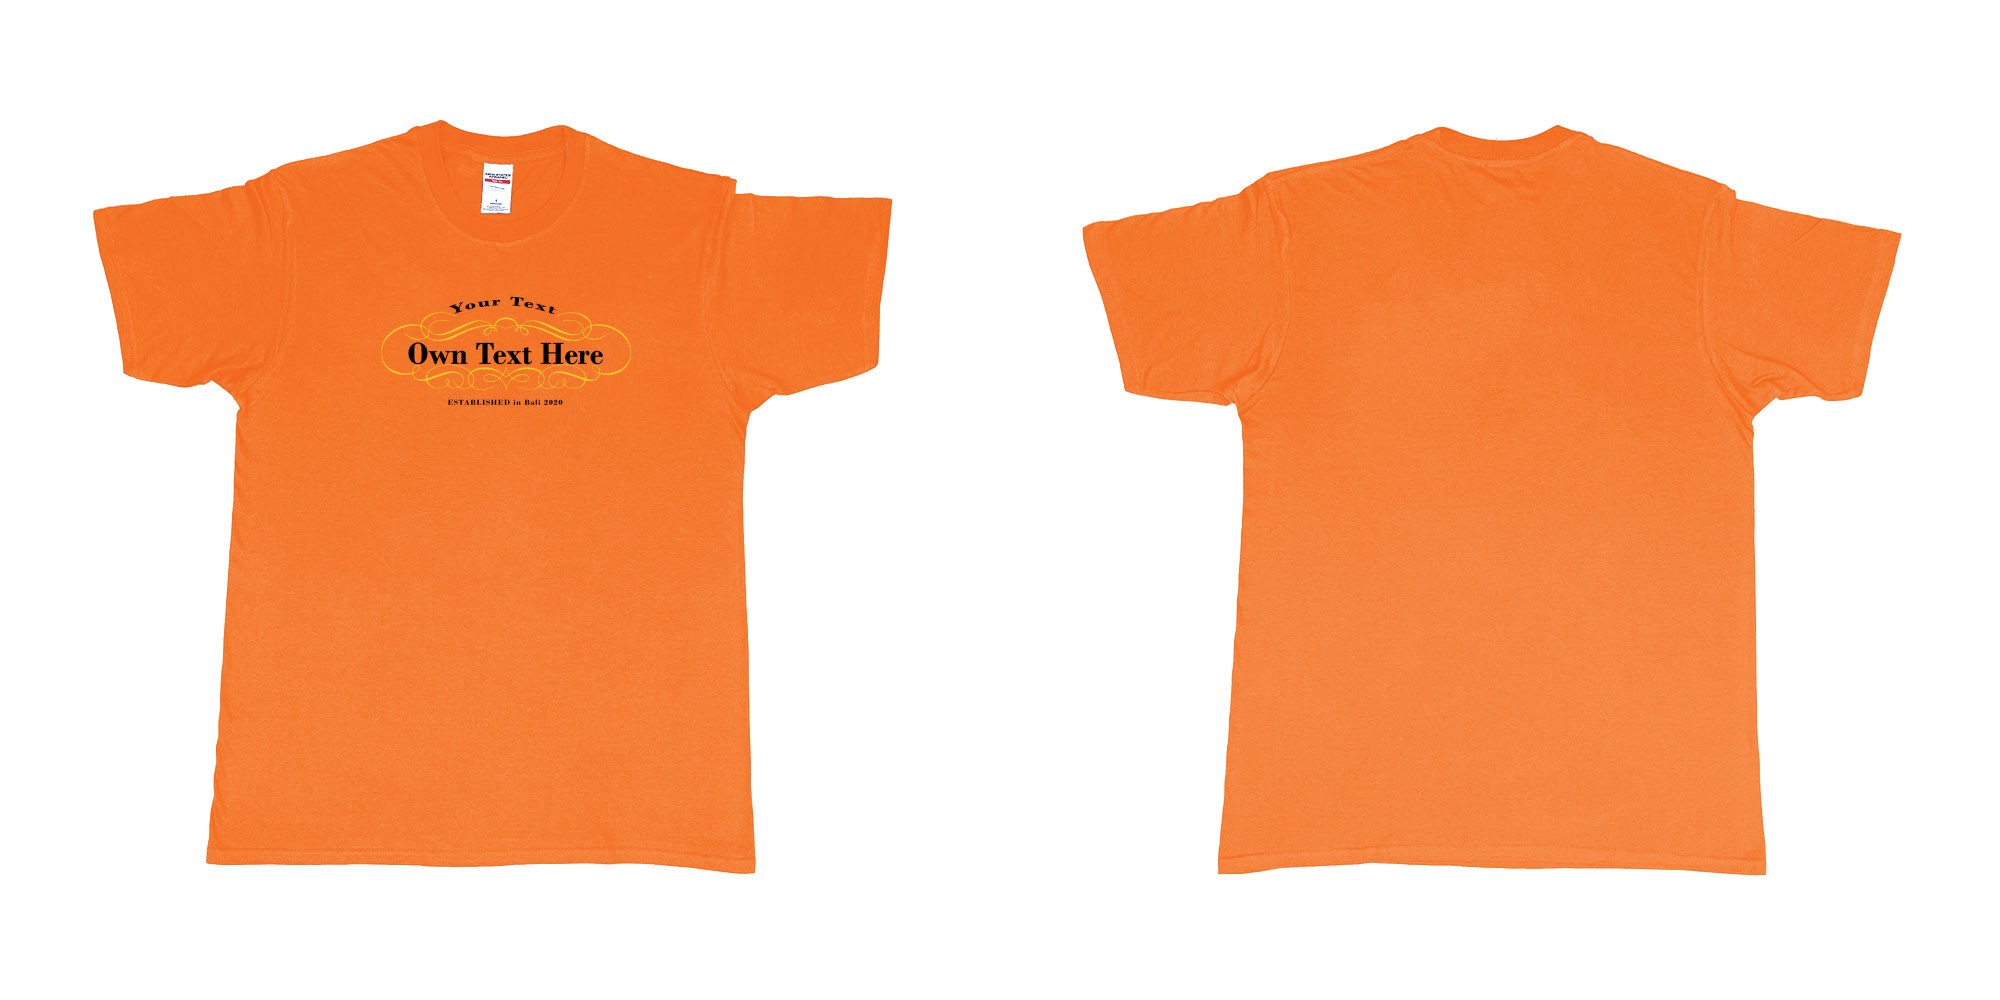 Custom tshirt design Laurent perrier in fabric color orange choice your own text made in Bali by The Pirate Way